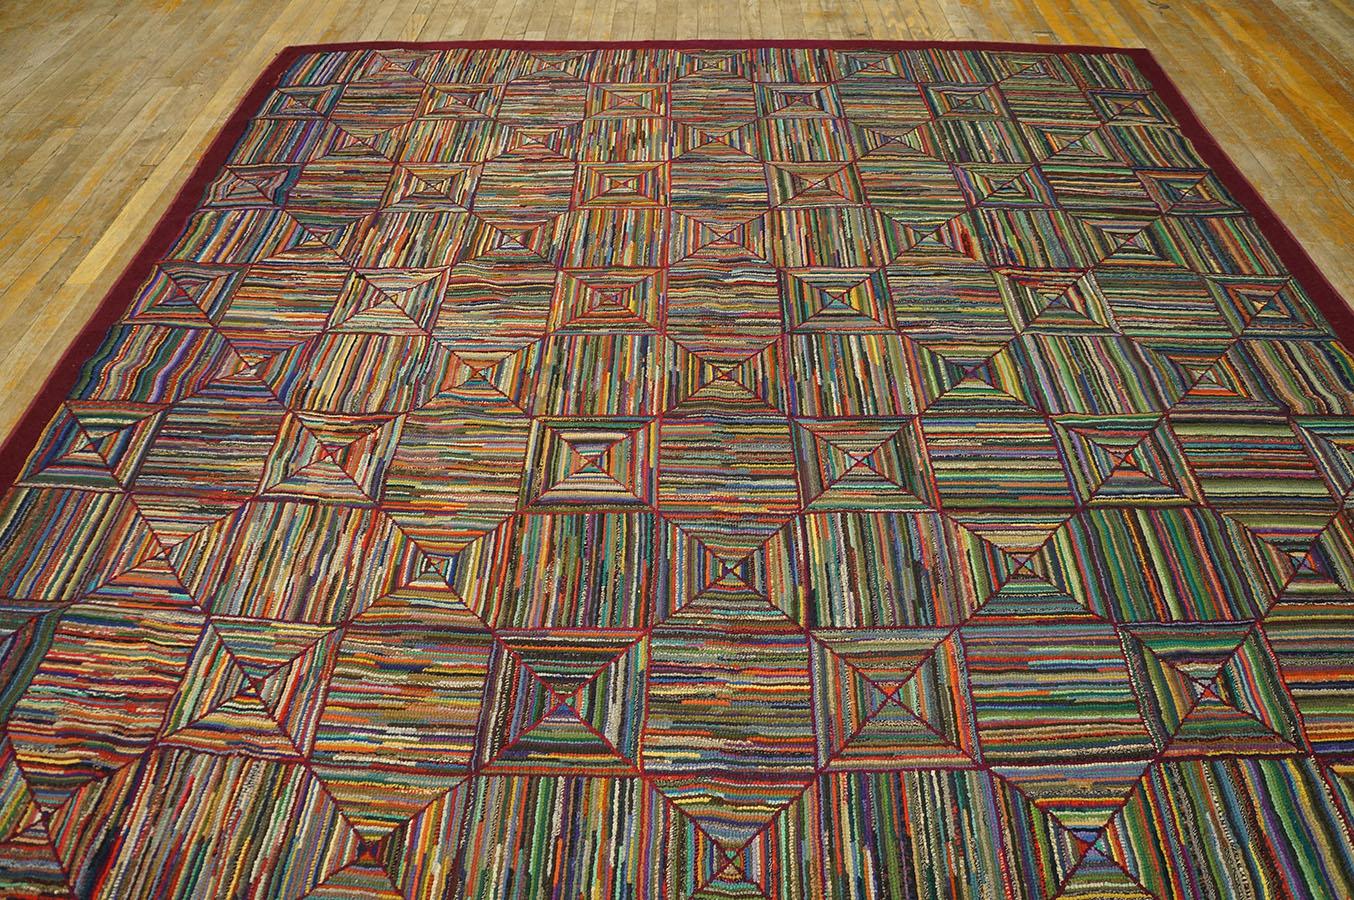 Mid 20th Century American Hooked Rug ( 7' 6'' x 9' 2''  - 228 x 279 cm ) In Good Condition For Sale In New York, NY